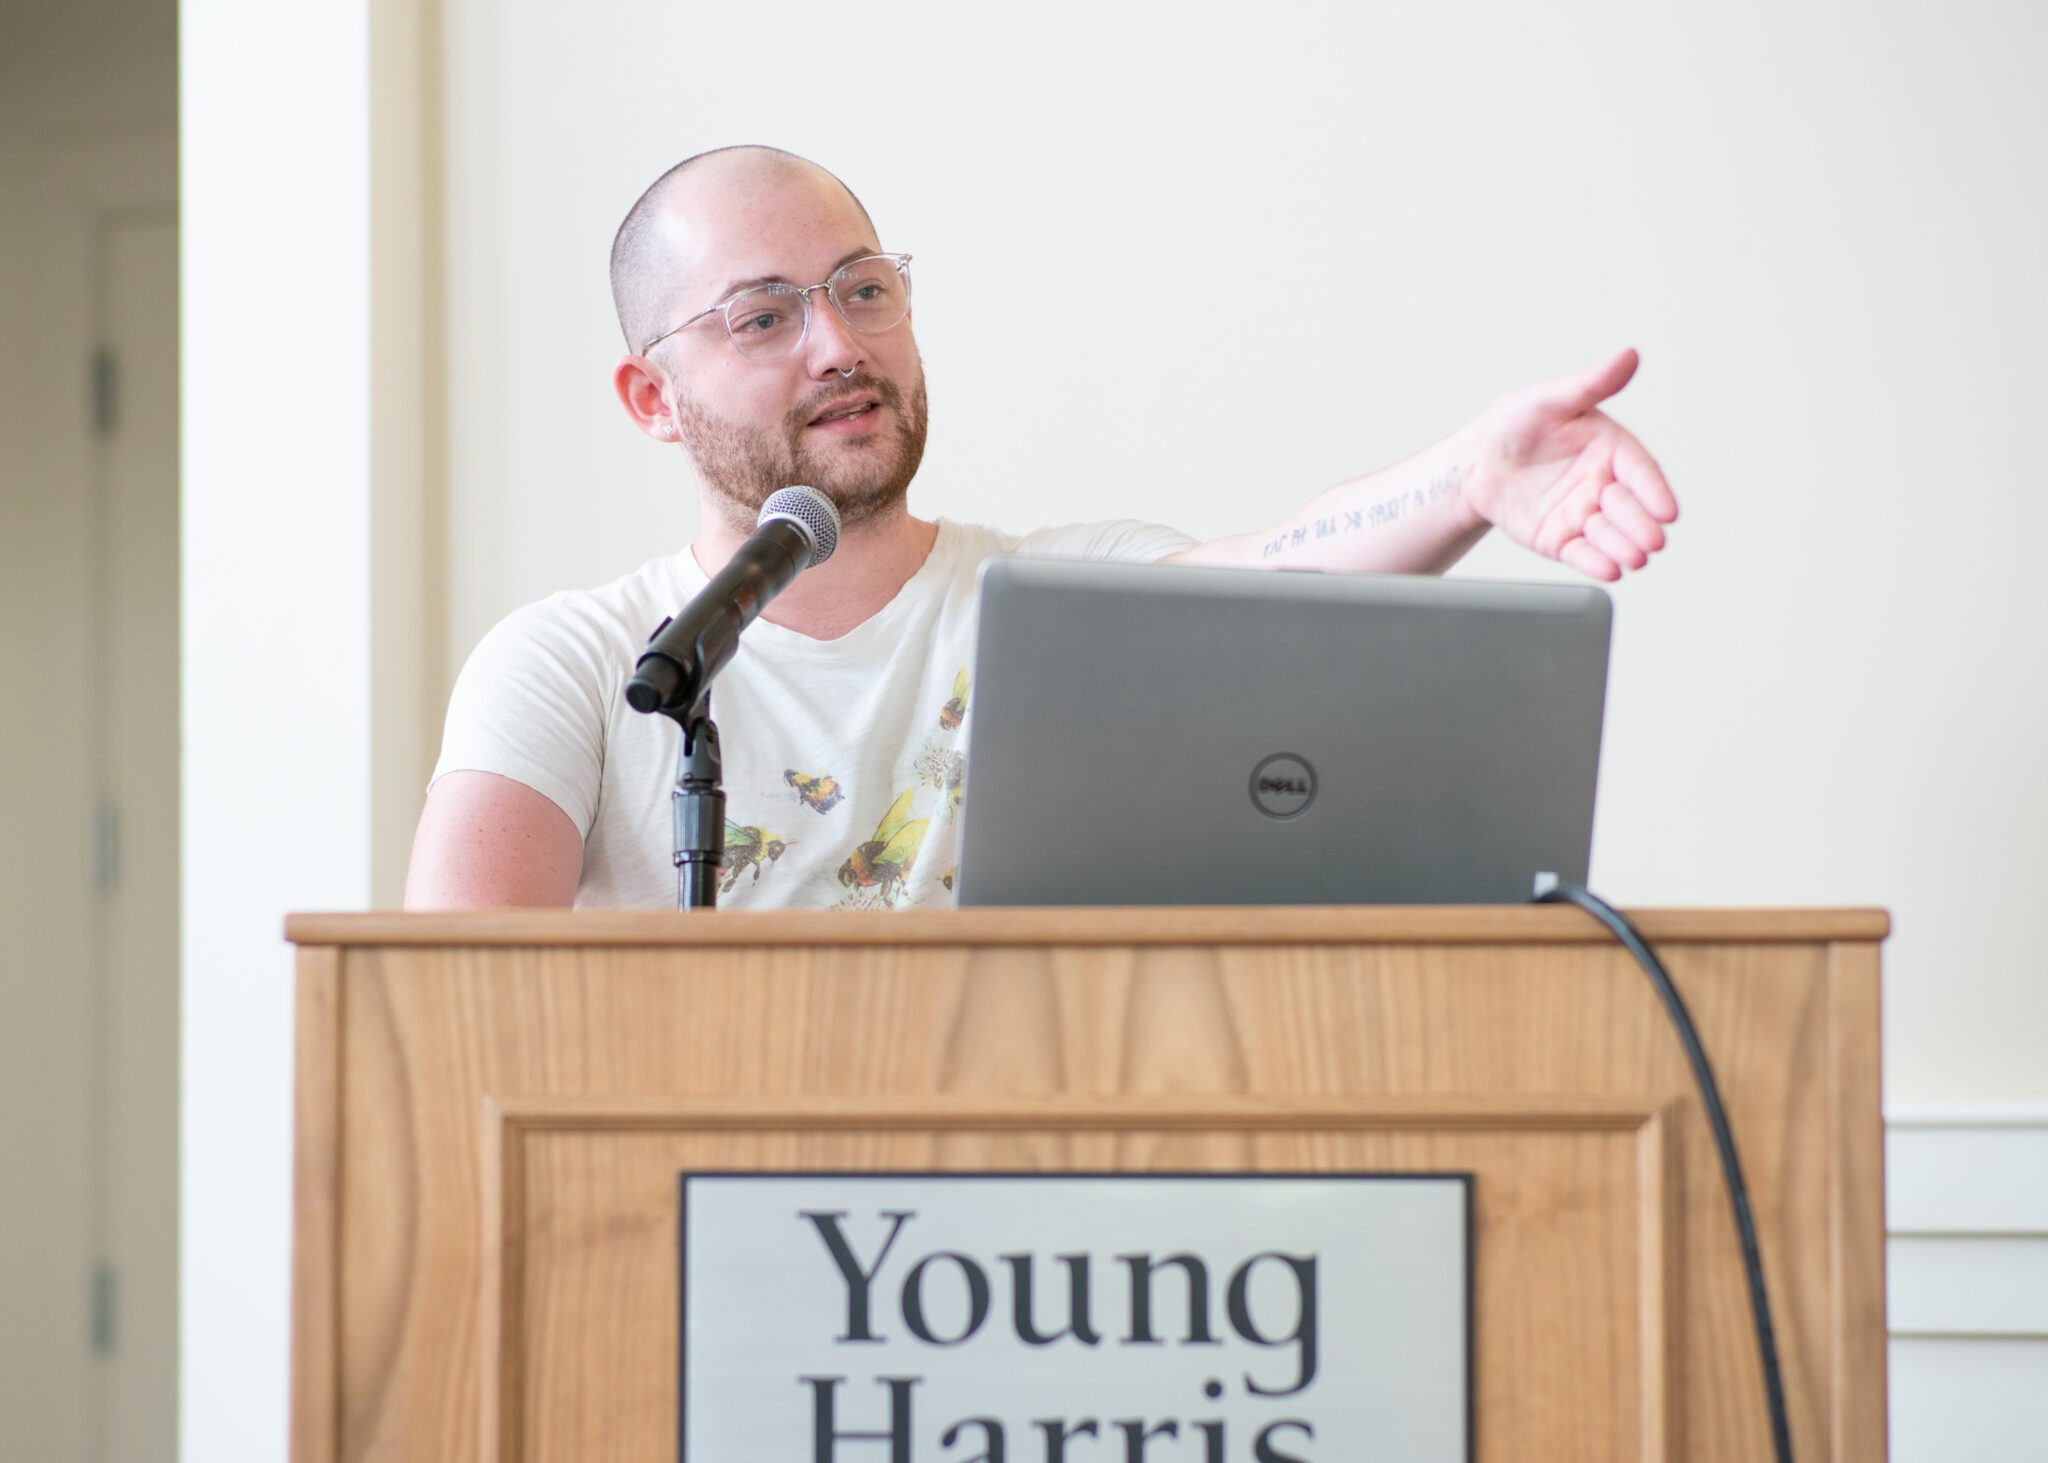 Lewis Bartlett presents at the Young Harris Beekeeping Event last May. (Photo by Sidney Rouse)